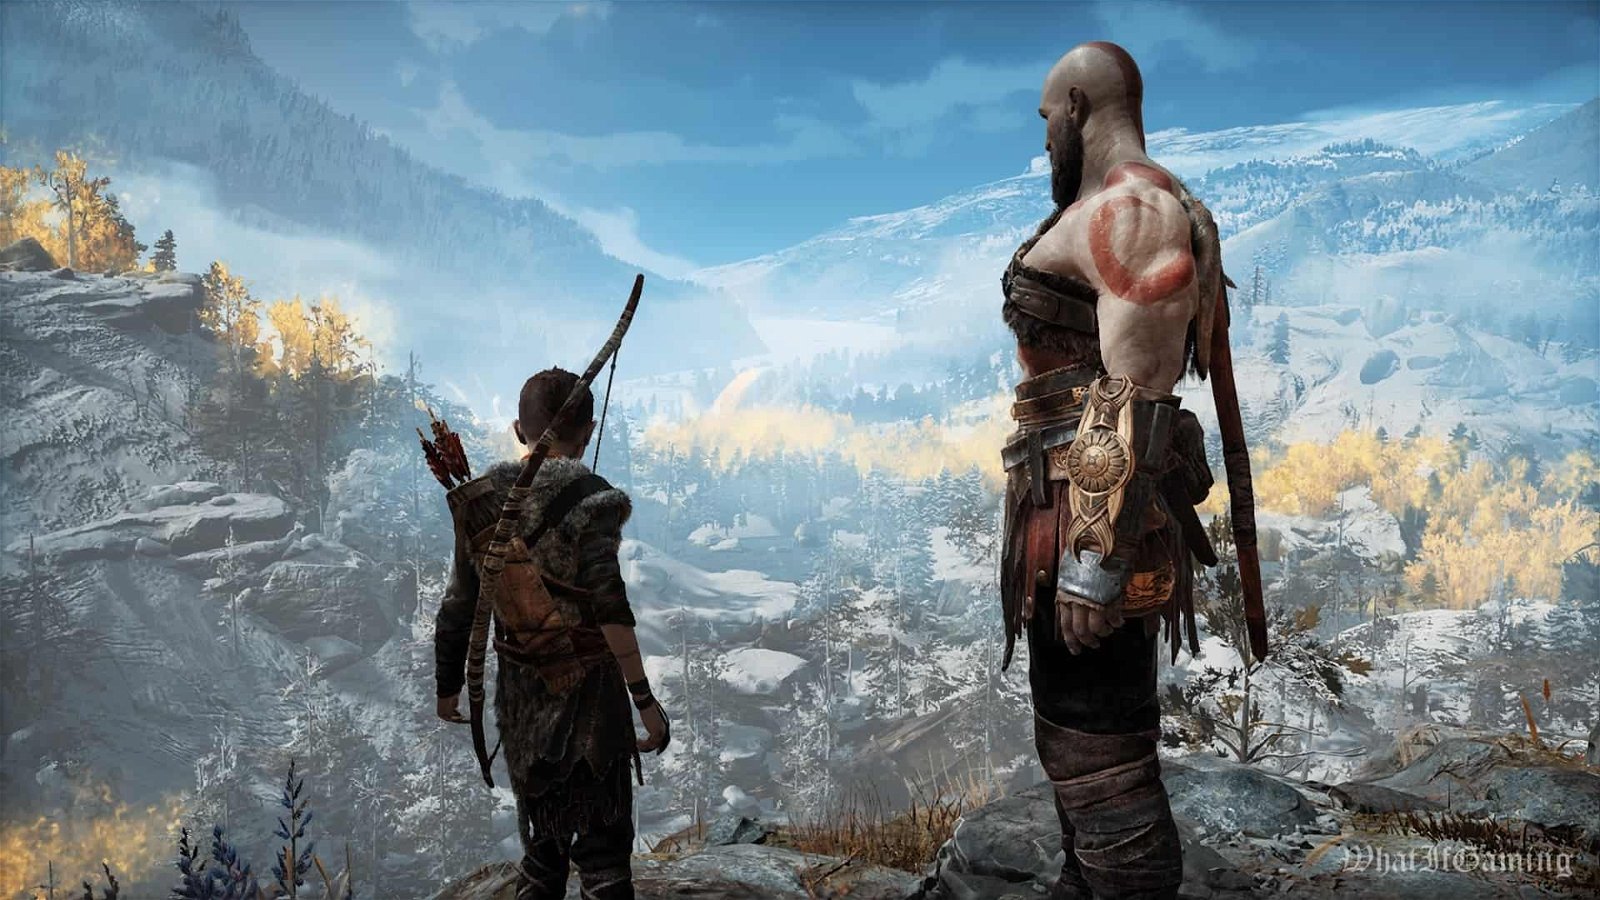 God of War Wins GOTY at 2019 Game Developers Choice Awards